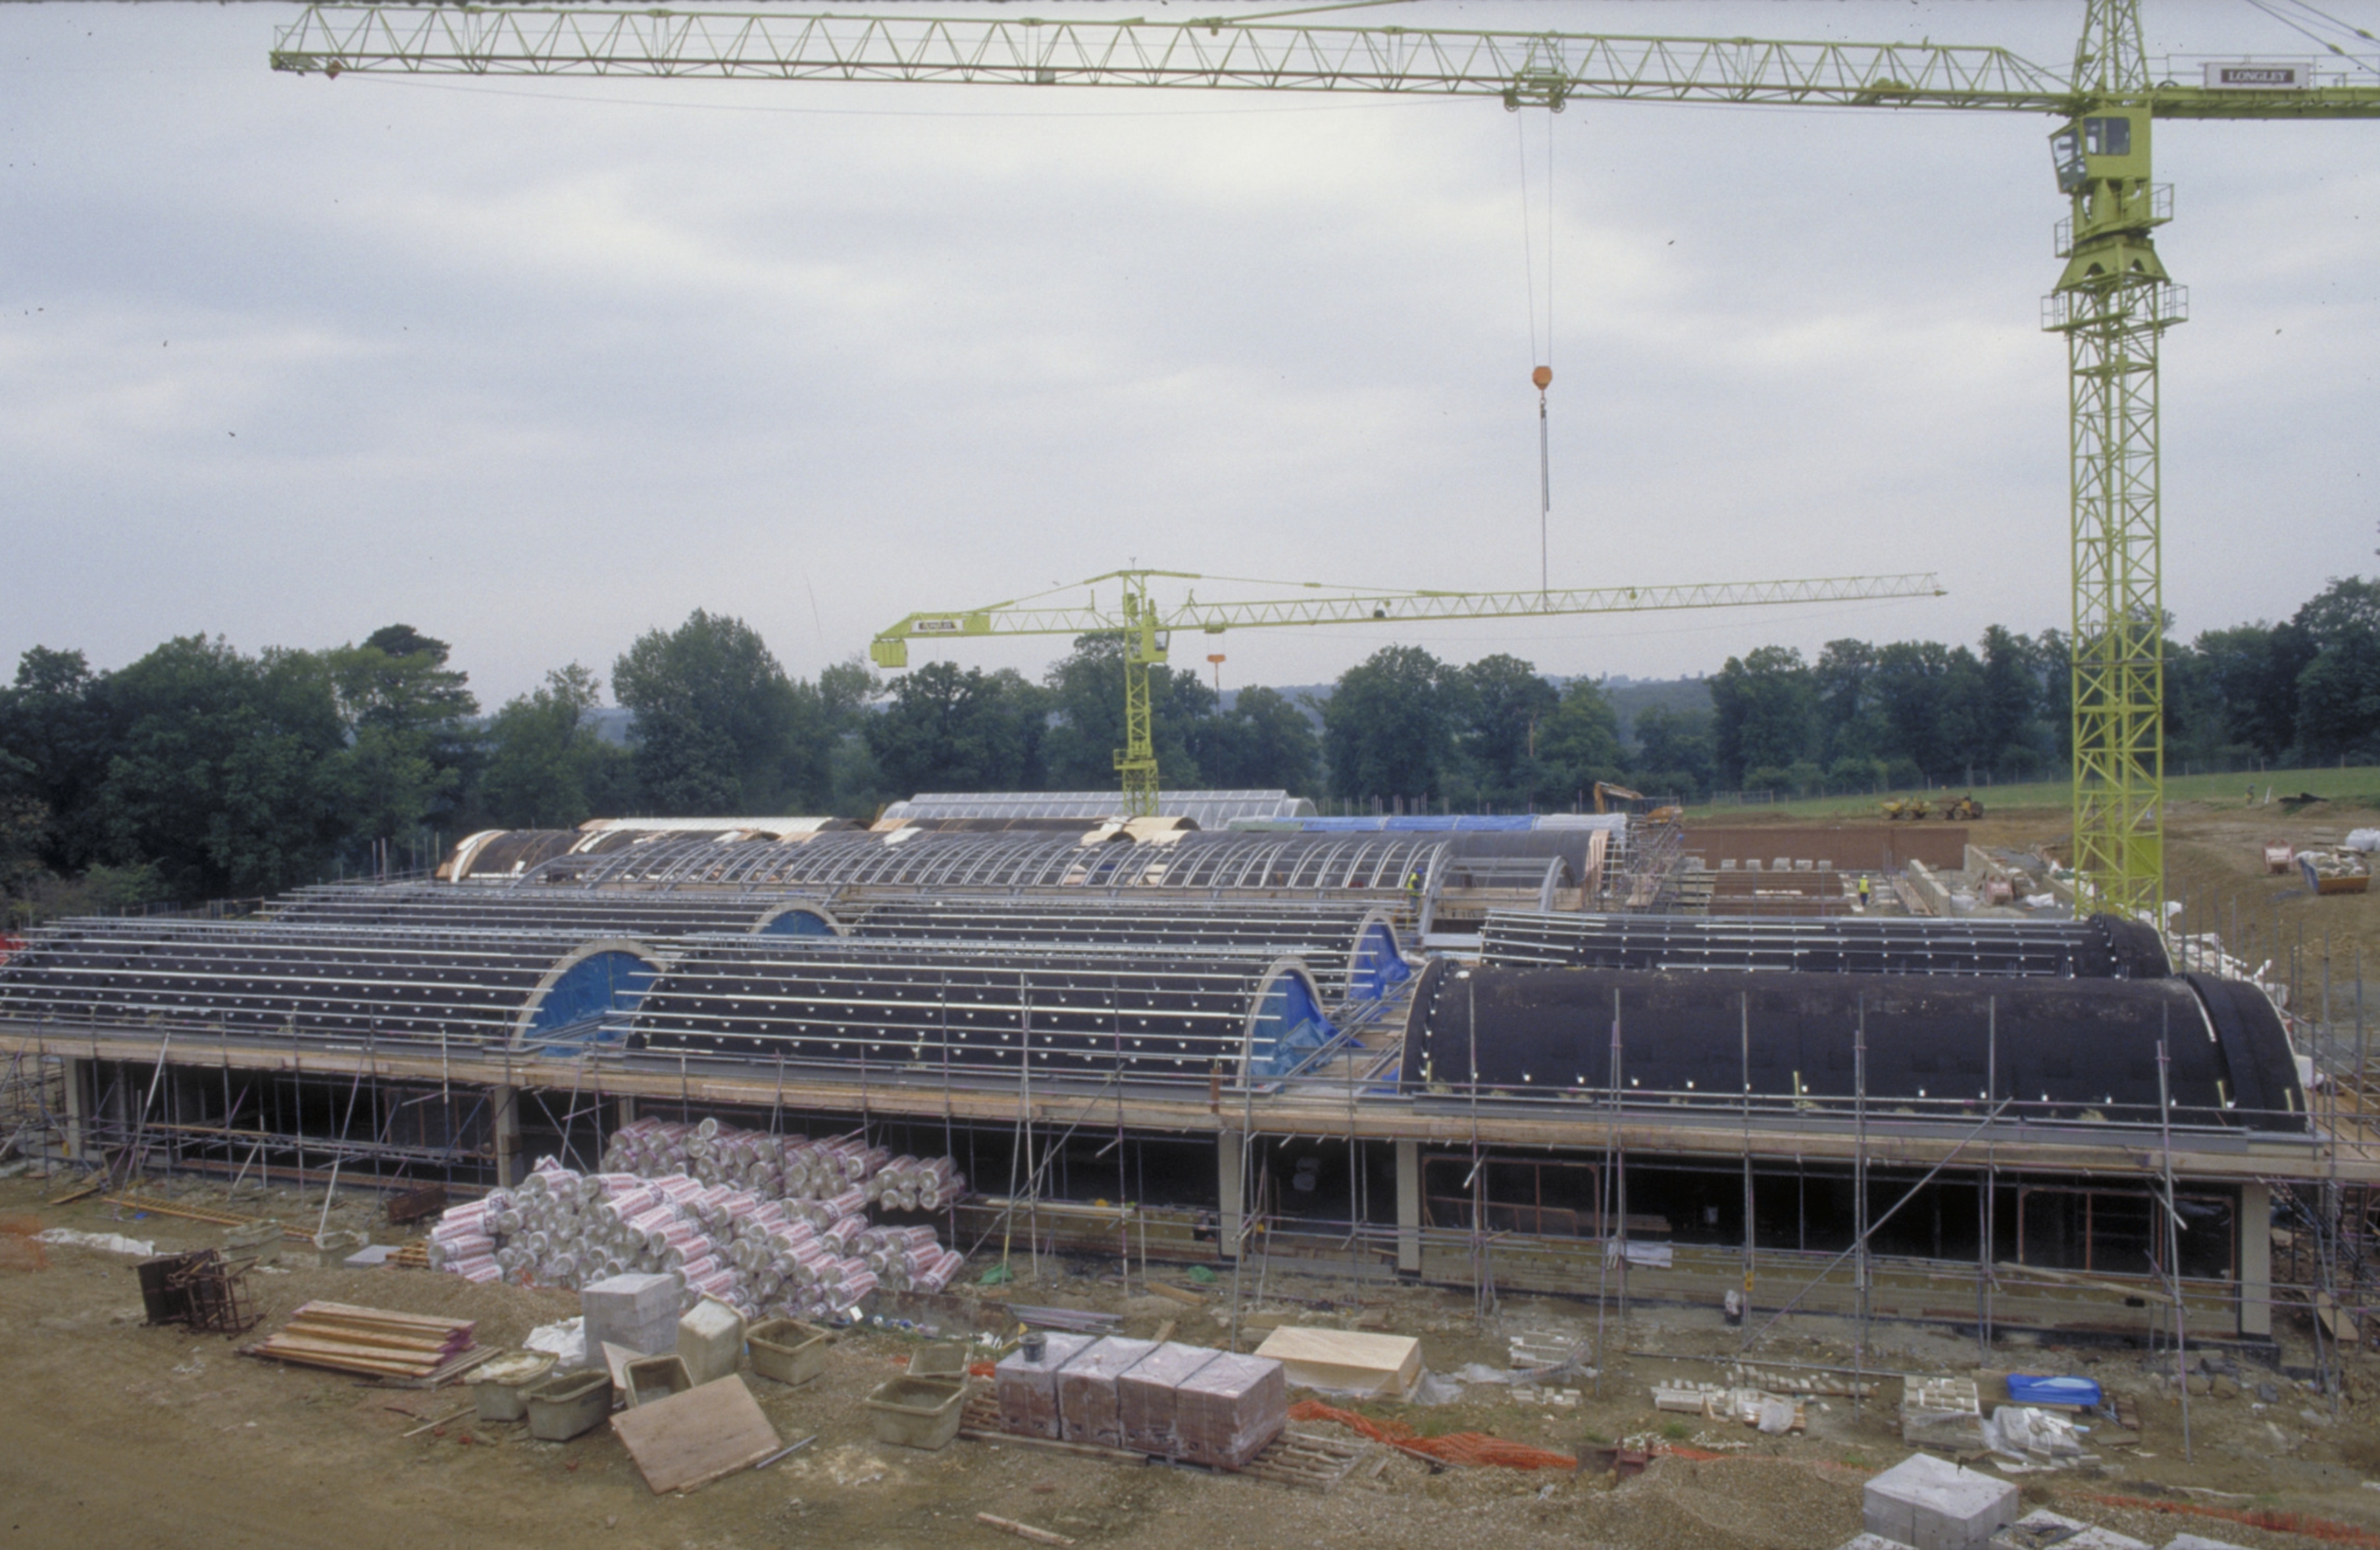 An old photograph showing early construction of the Millennium Seed Bank © RBG Kew